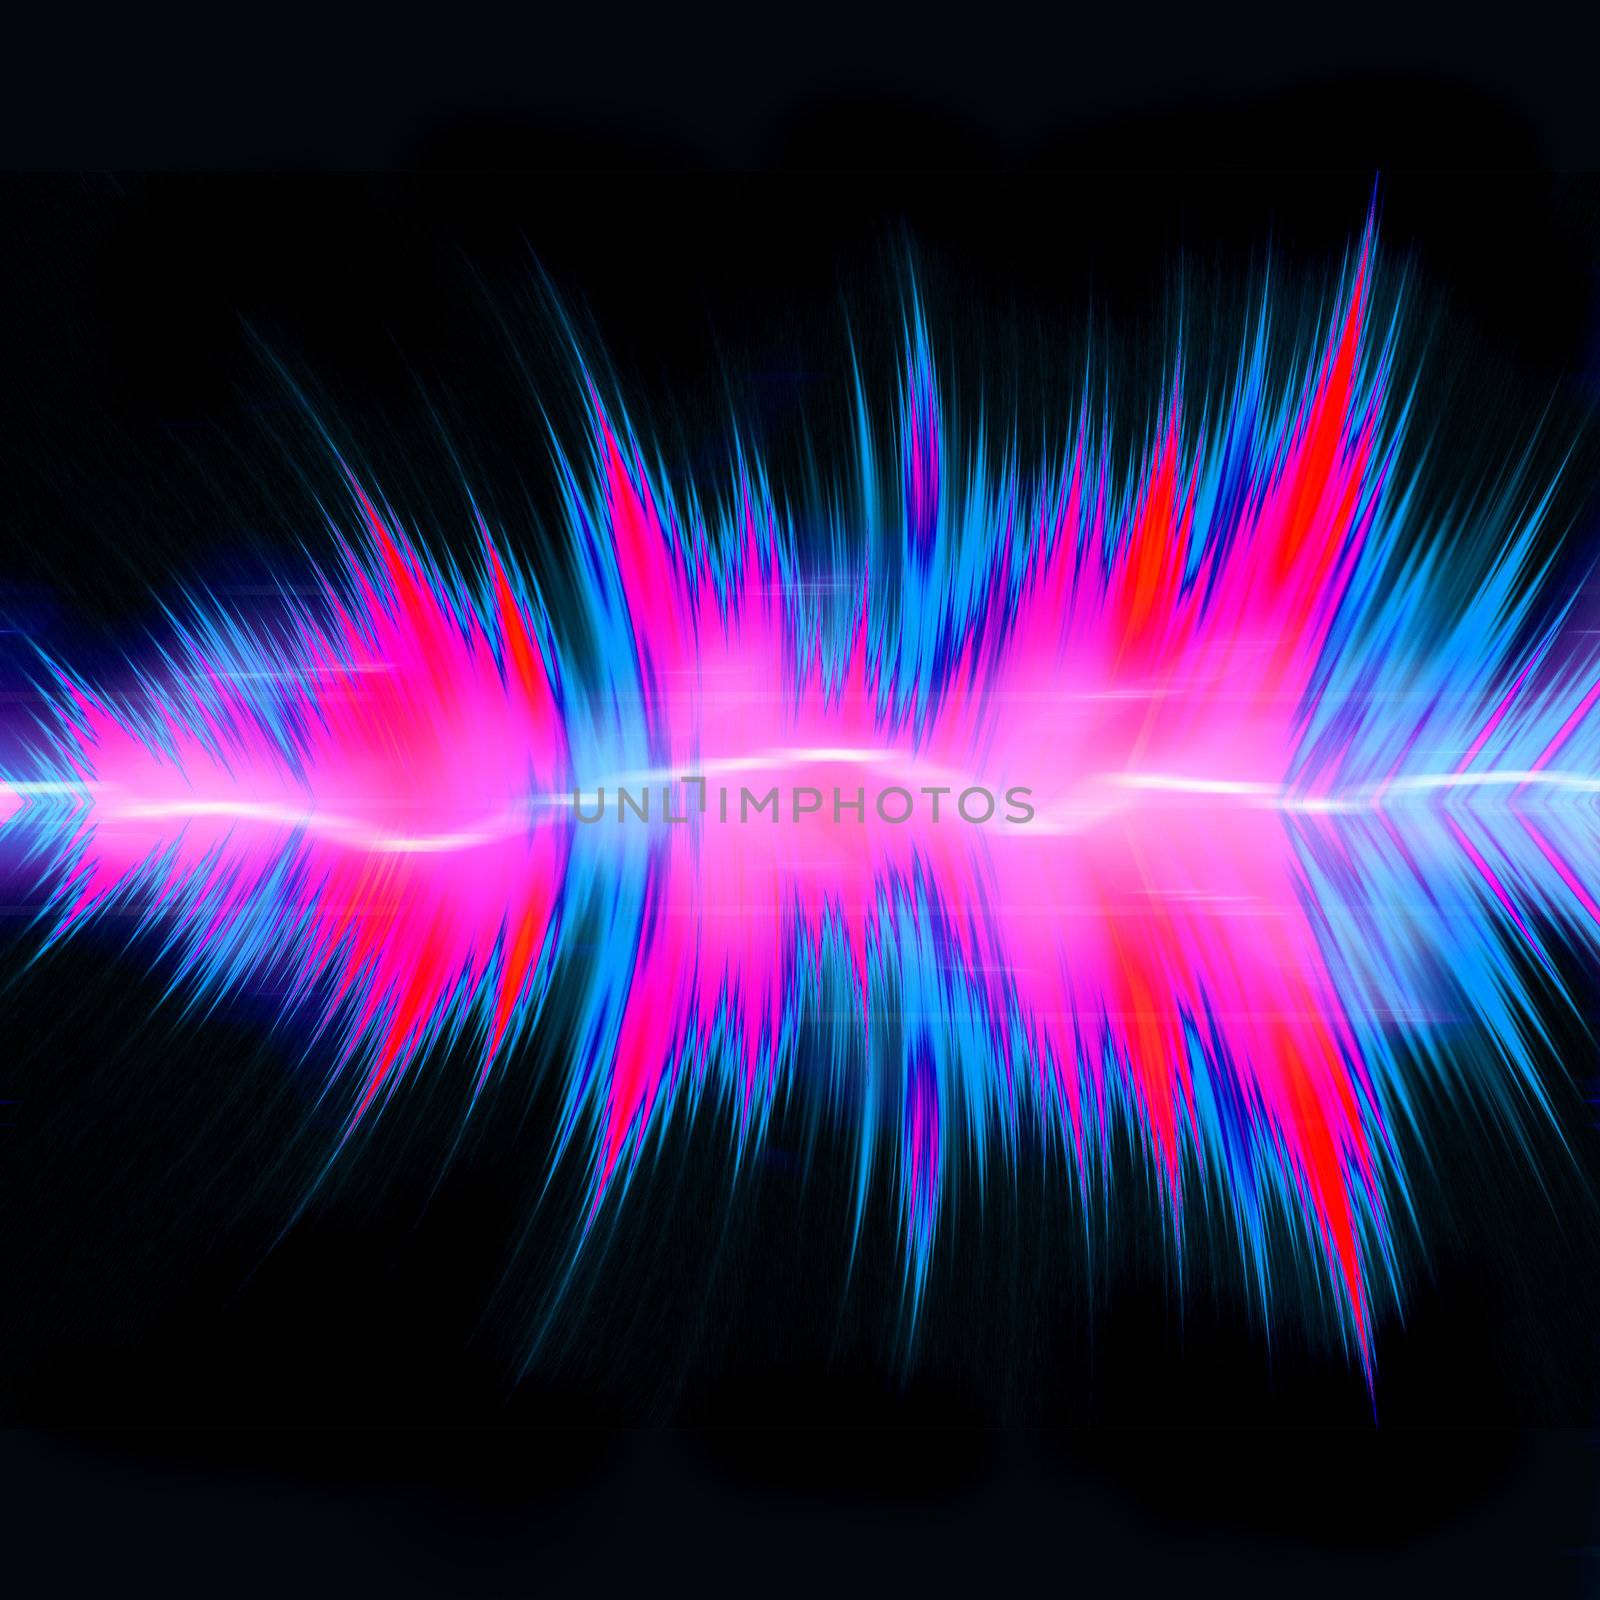 Powerful Audio Waves by graficallyminded